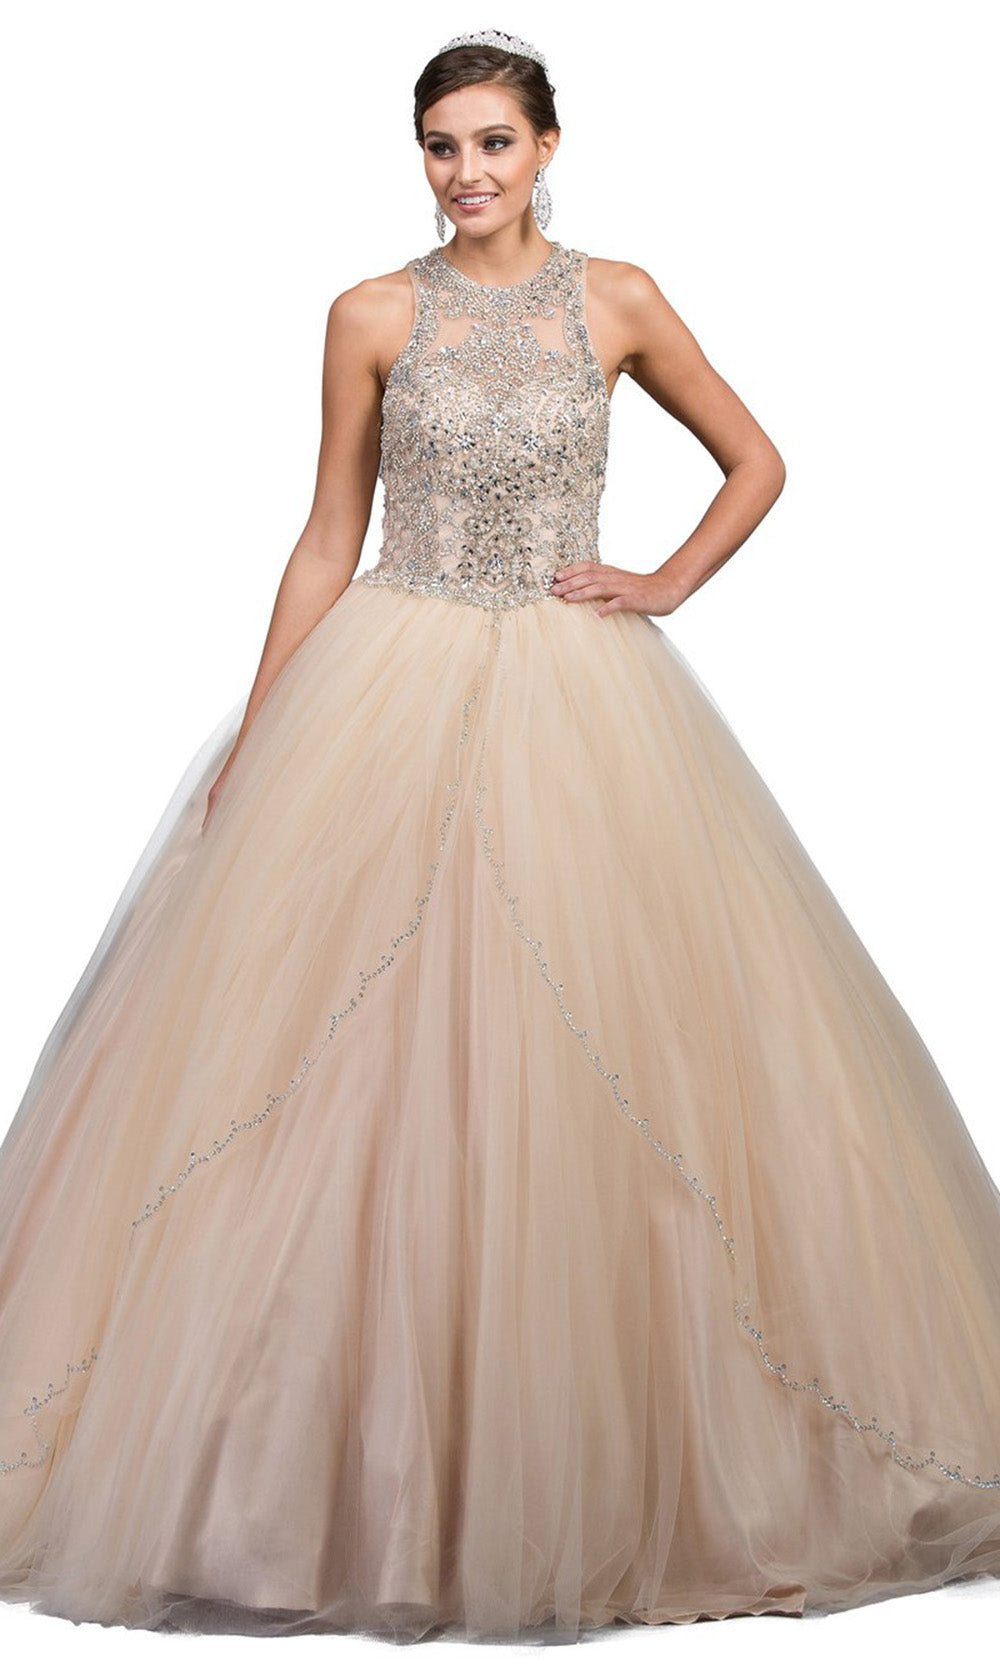 Dancing Queen - 1205 Beaded Illusion Halter Ballgown In Champagne & Gold